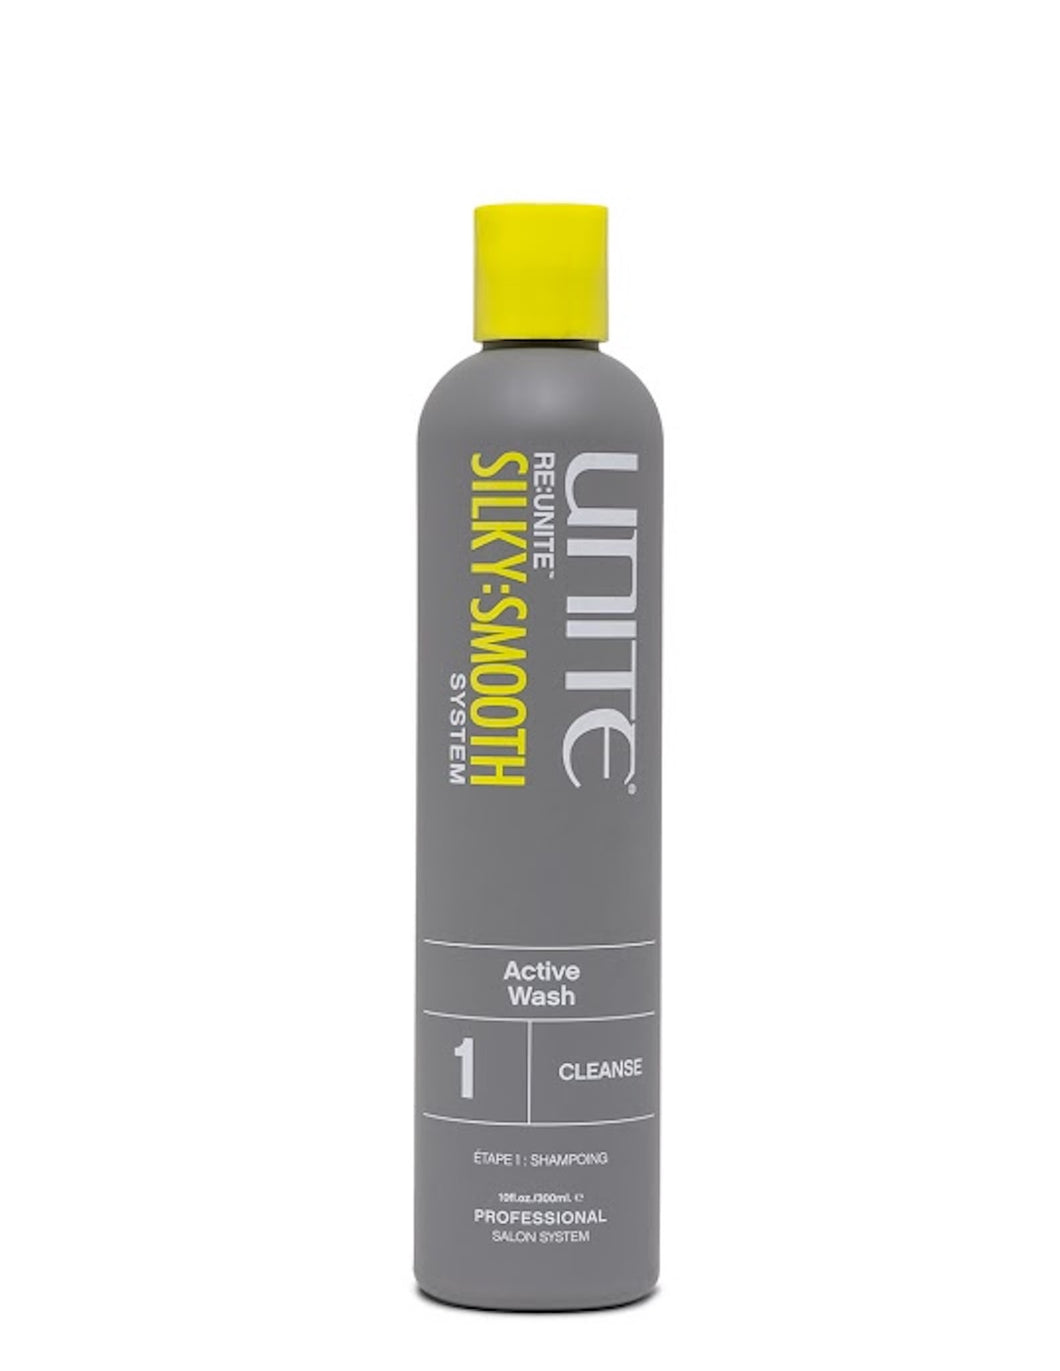 RE:UNITE SILKY:SMOOTH Cleanse Gray 10oz bottle with Yellow flip cap